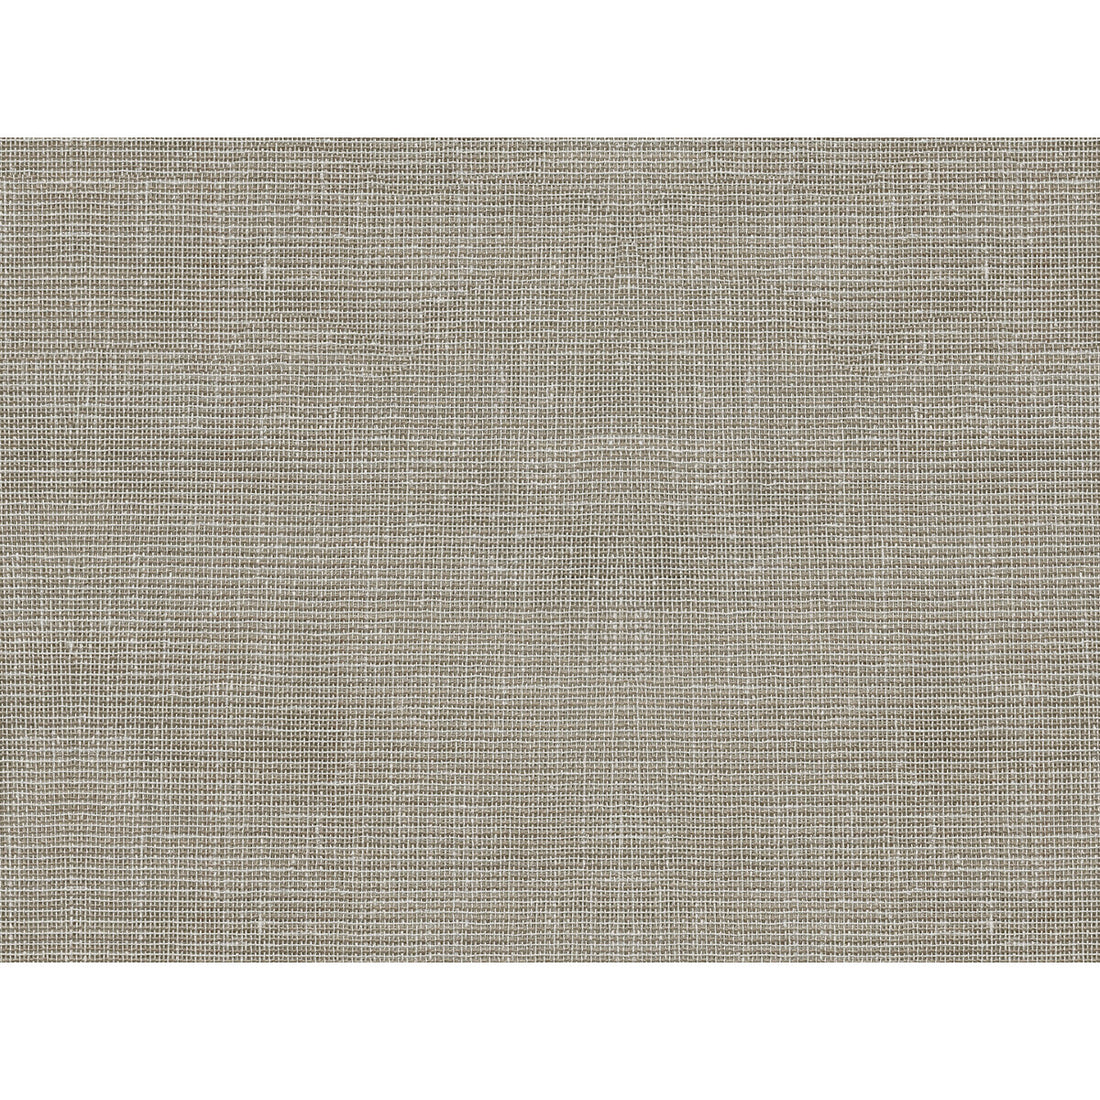 Kravet Contract fabric in 4529-16 color - pattern 4529.16.0 - by Kravet Contract